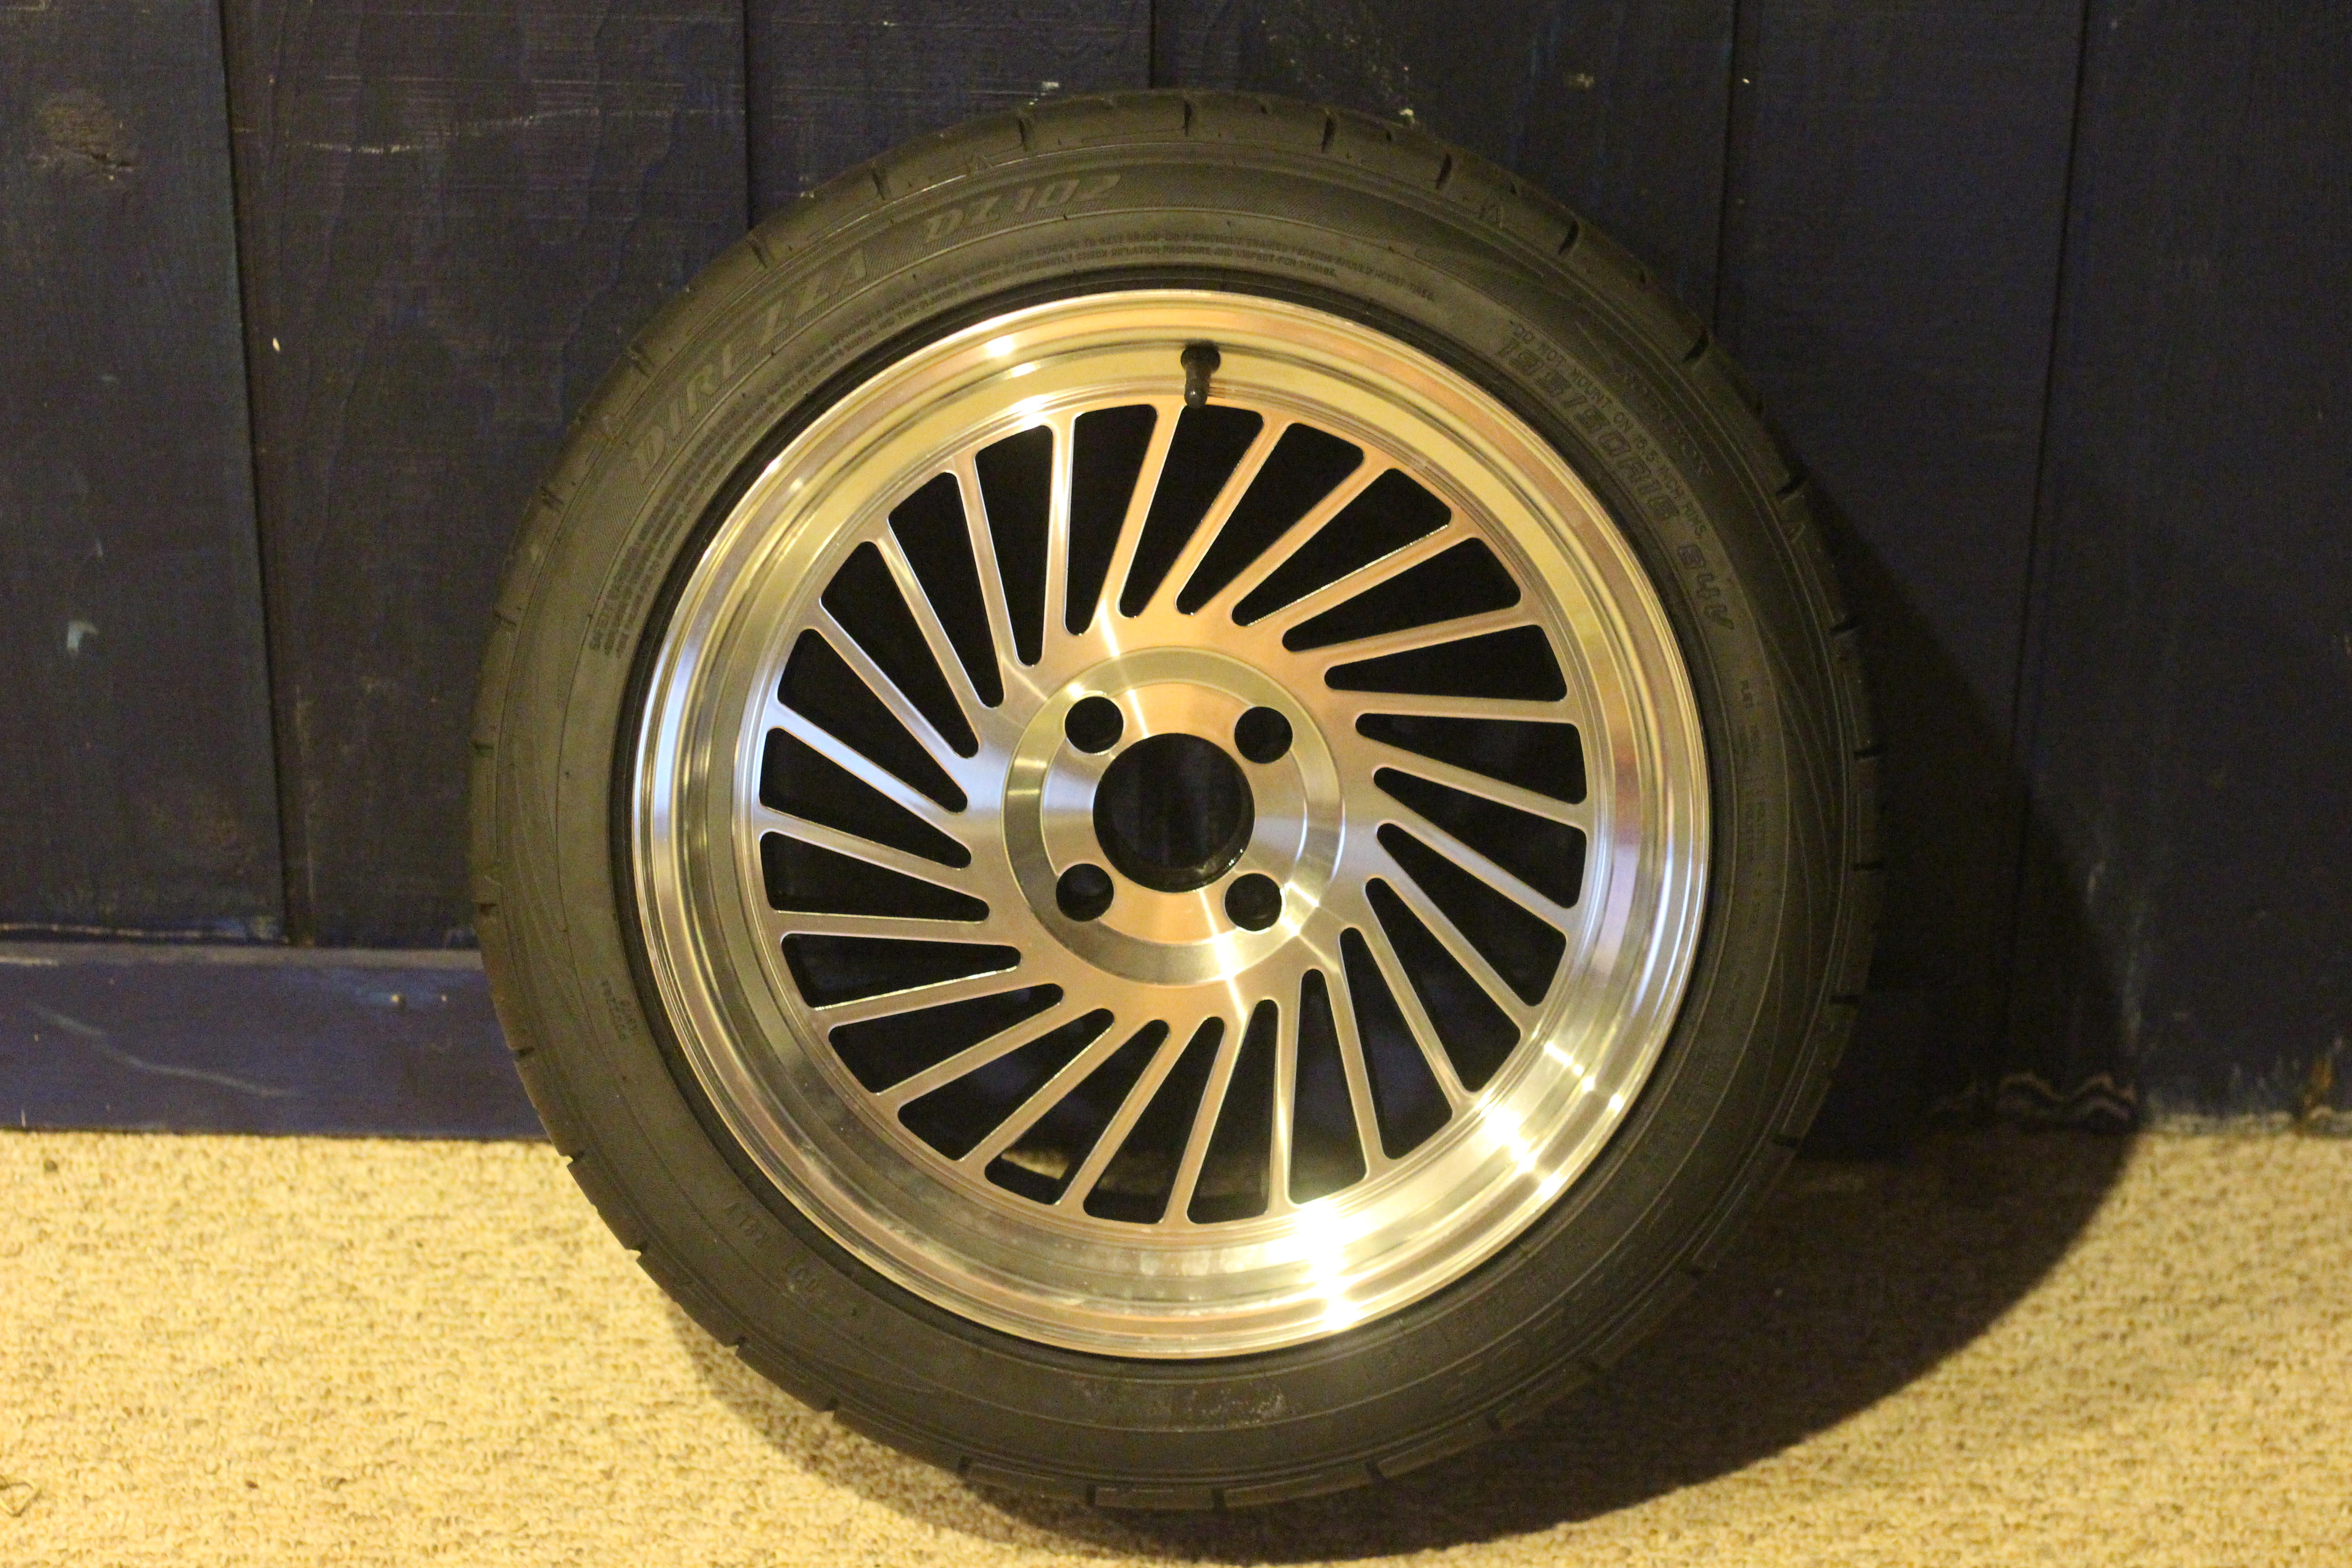 FS brand new wheels & tires for sale!! North American Motoring